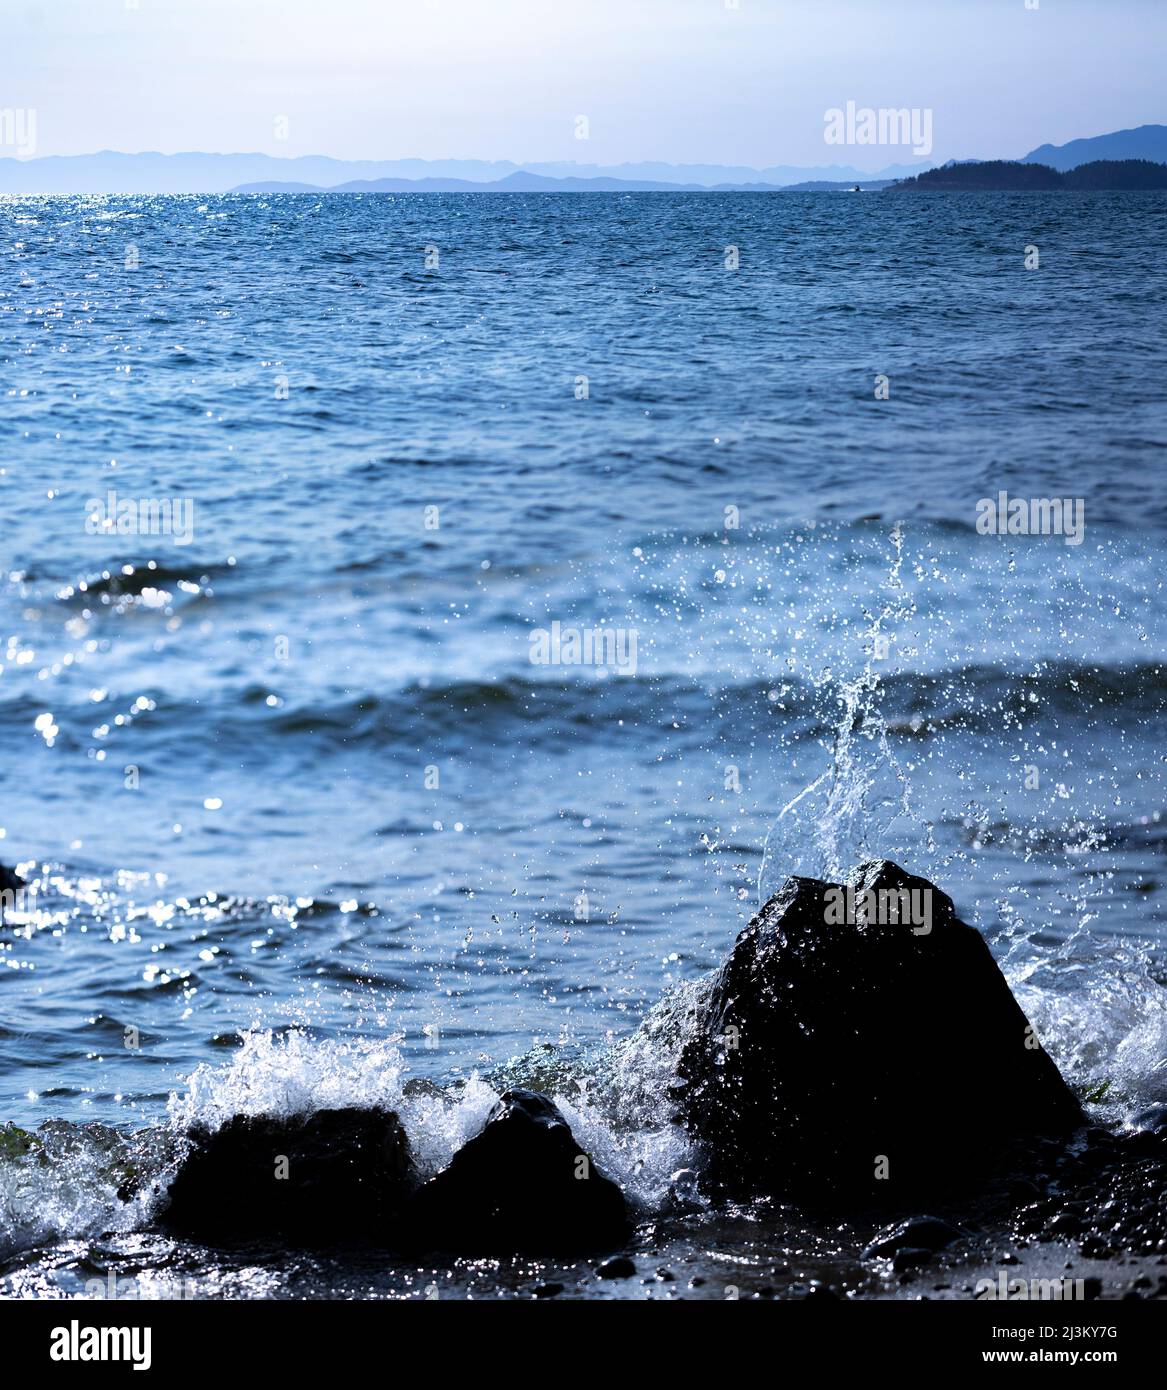 Splashing surf against rocks in the foreground with a view of the vast coastline along the Sunshine Coast; British Columbia, Canada Stock Photo